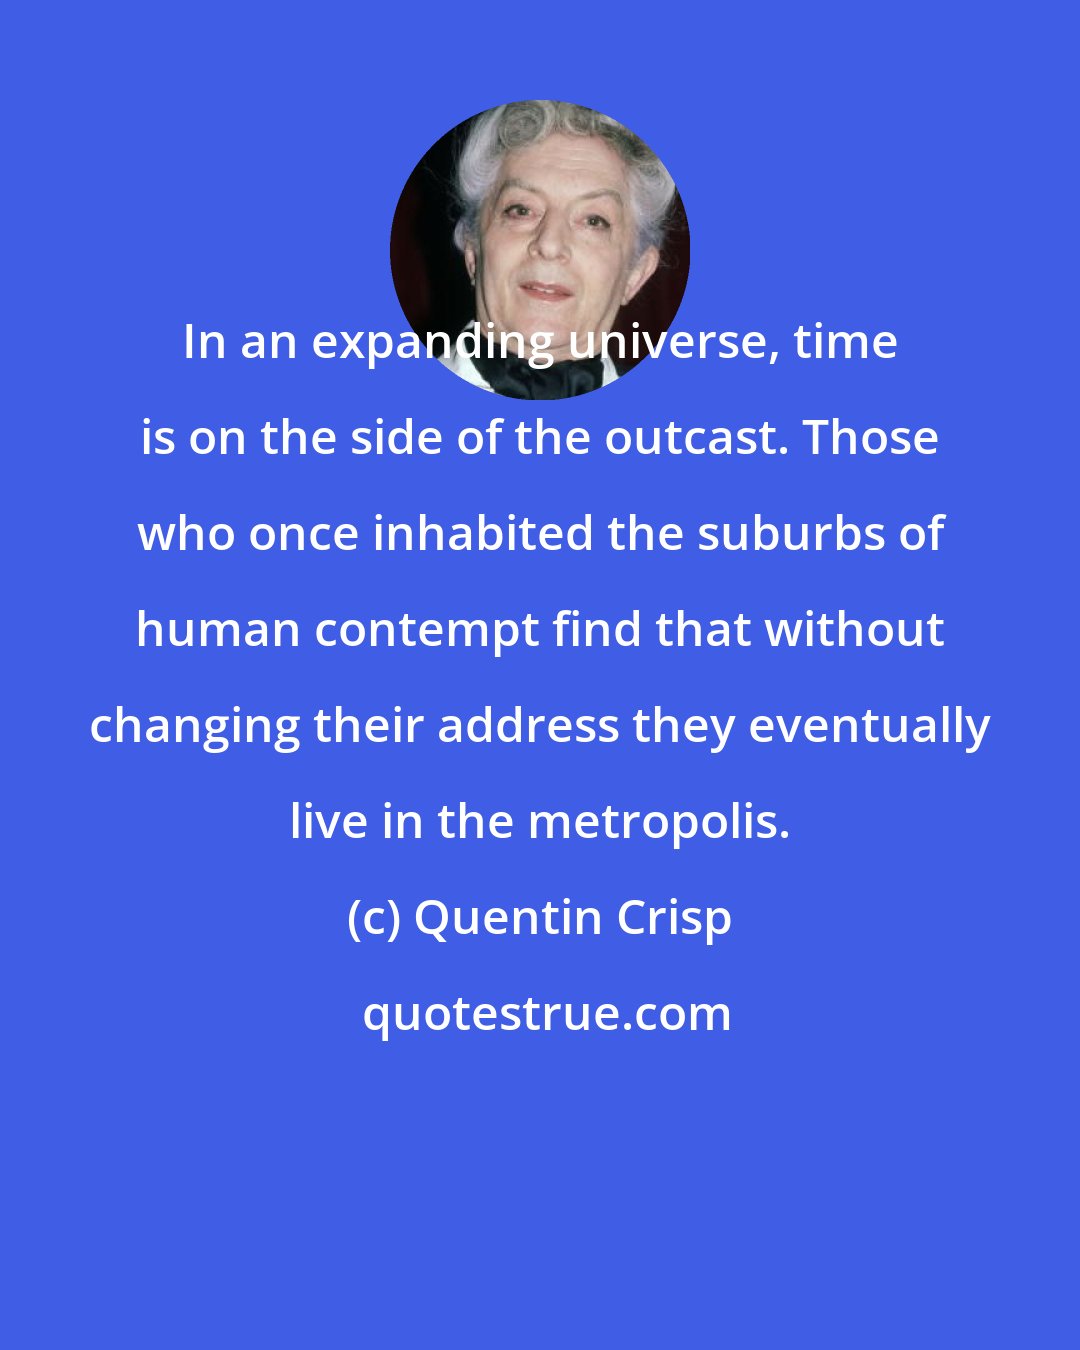 Quentin Crisp: In an expanding universe, time is on the side of the outcast. Those who once inhabited the suburbs of human contempt find that without changing their address they eventually live in the metropolis.